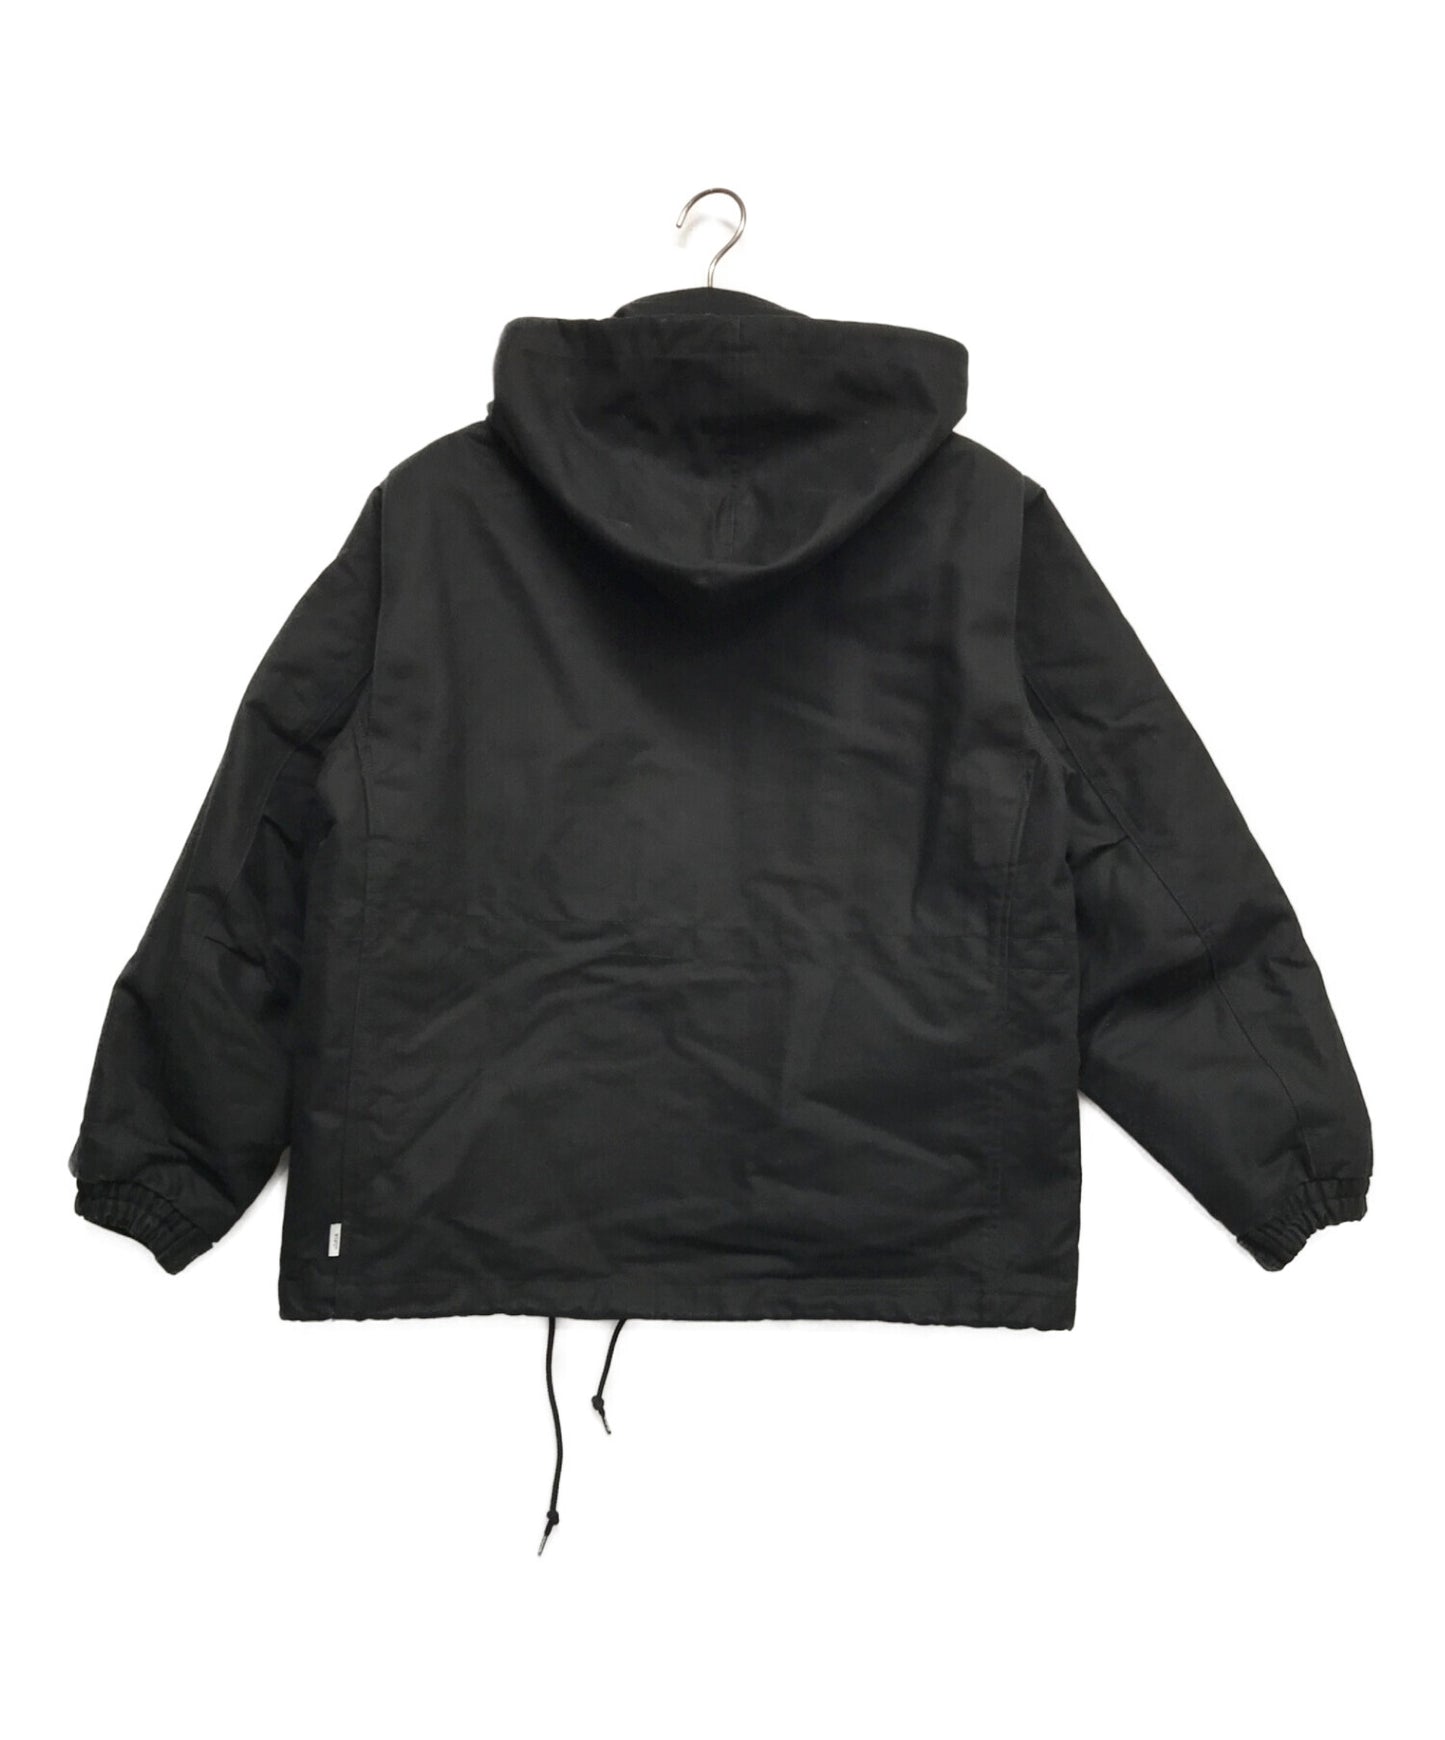 WTAPS Double S.F.M. Cotton Twill Jacket M-65 202WVDT-JKM01